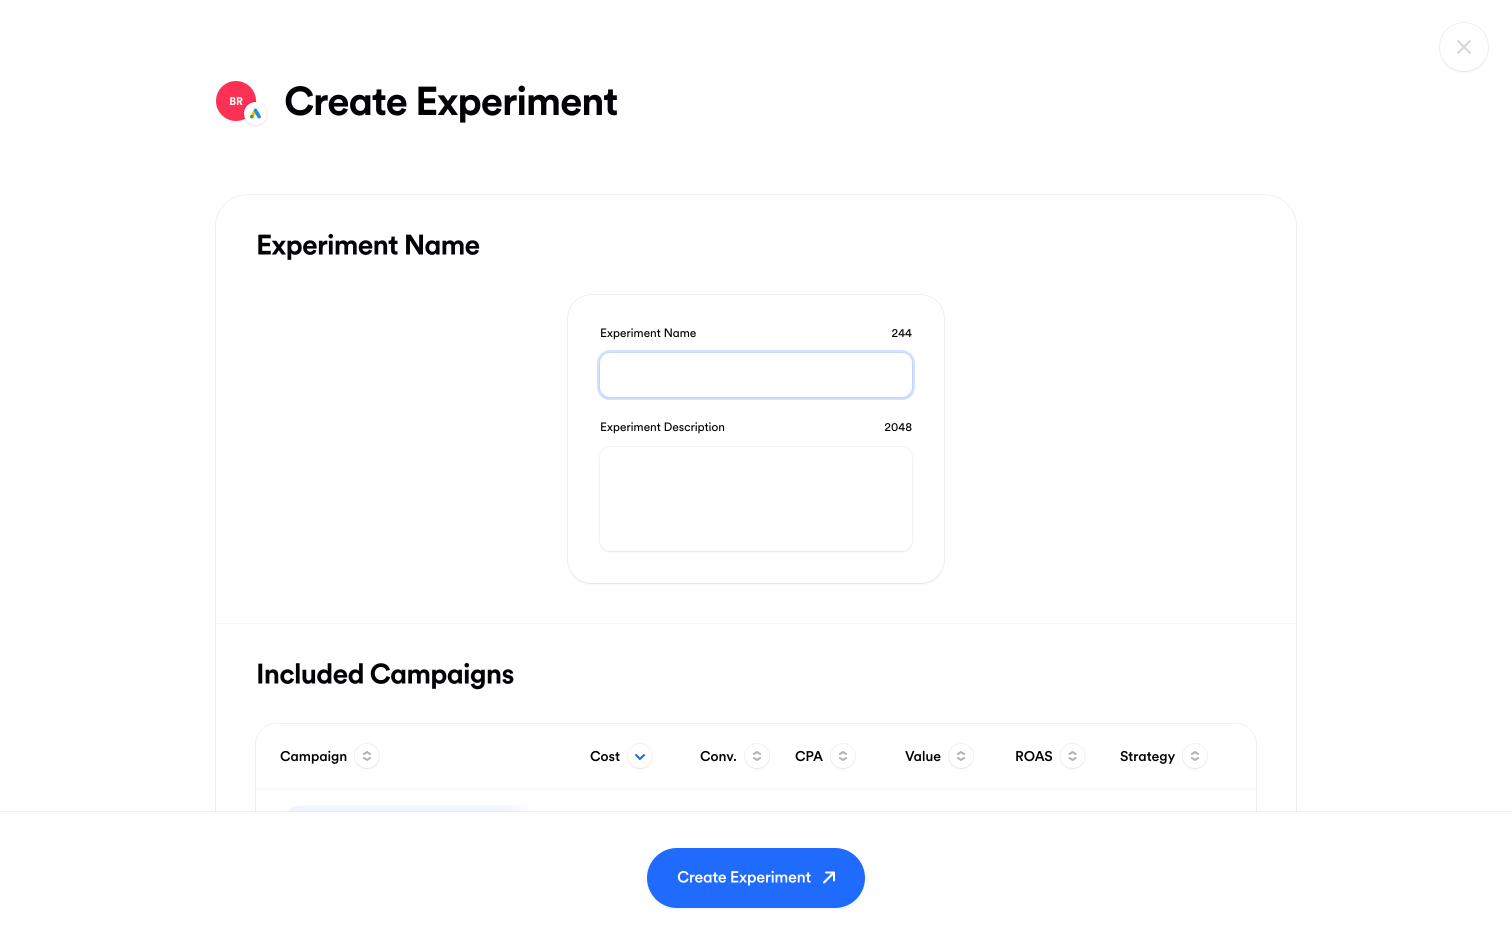 Screenshot of the "Create Experiment" flow in Opteo